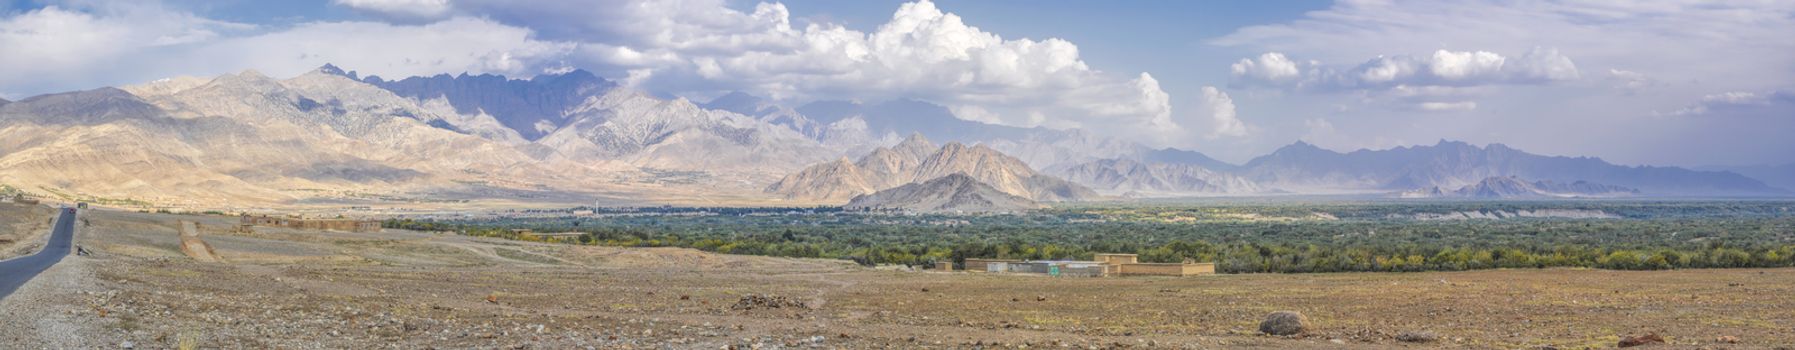 Scenic panorama of arid landscape around Kabul in Afghanistan